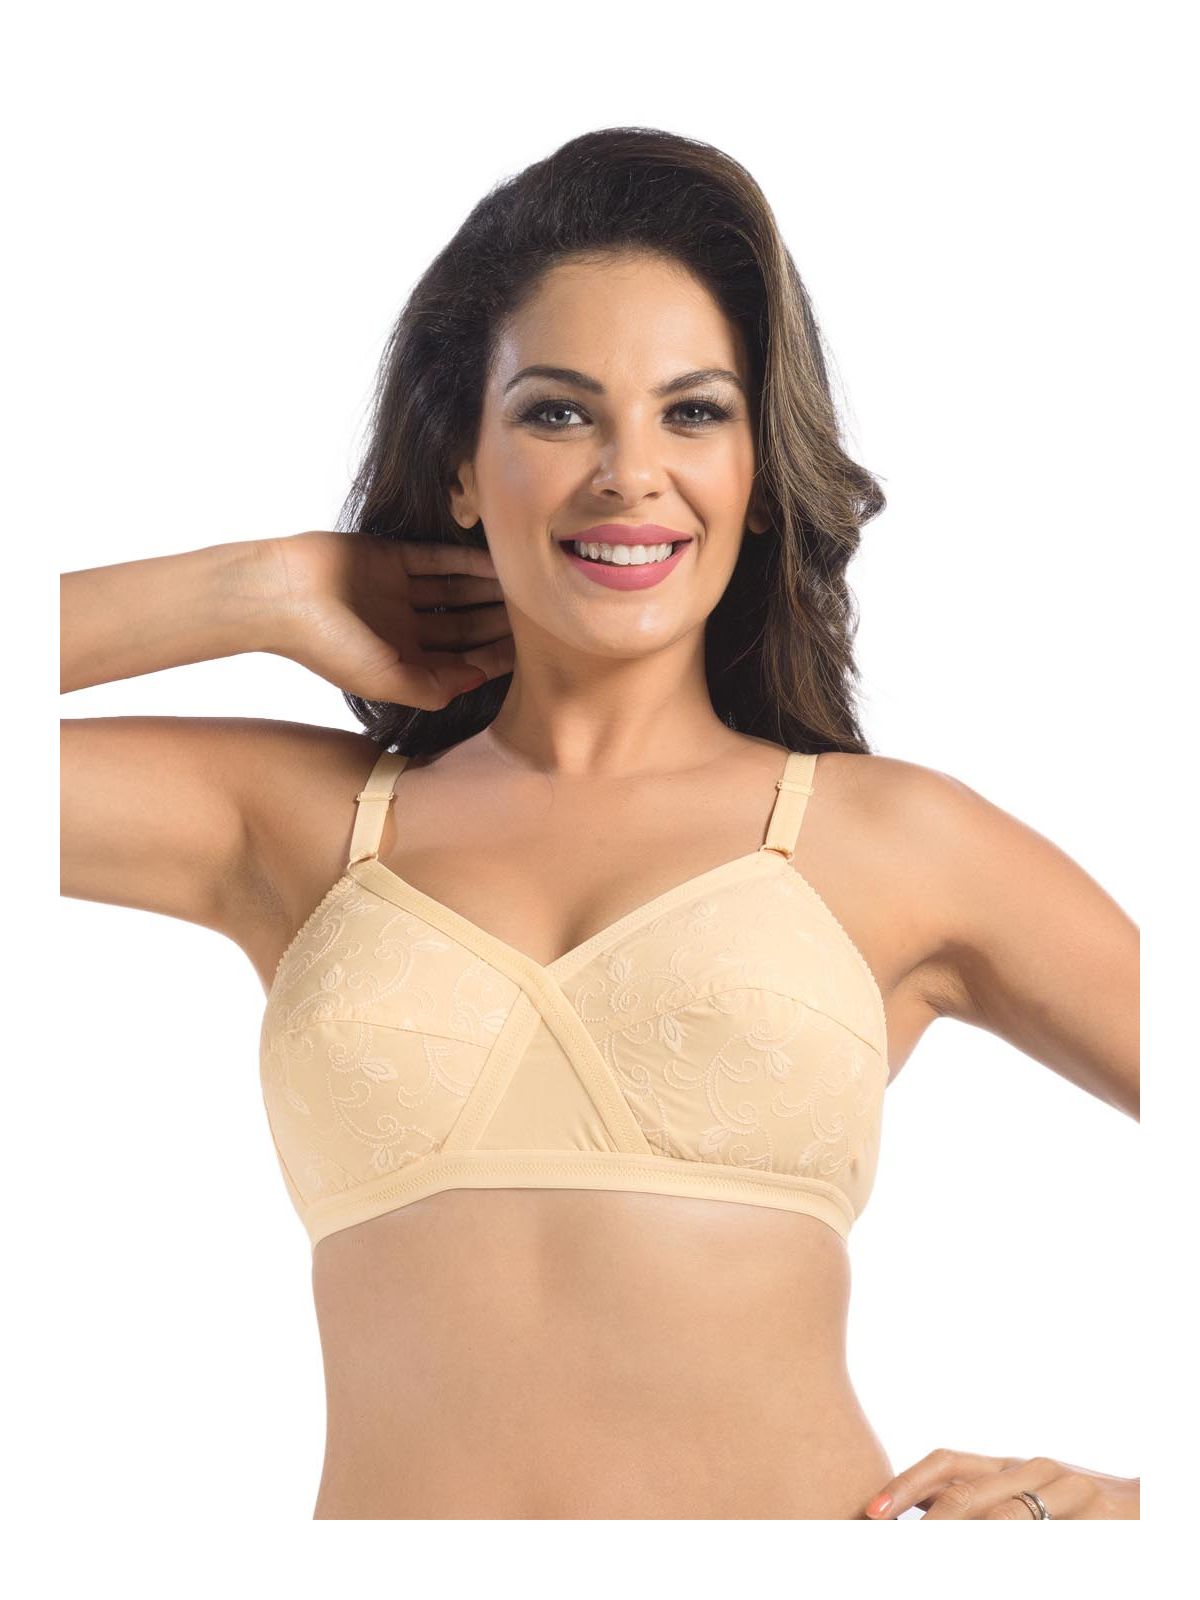 Sonari B Cup Size Everyday Bra Price Starting From Rs 329. Find